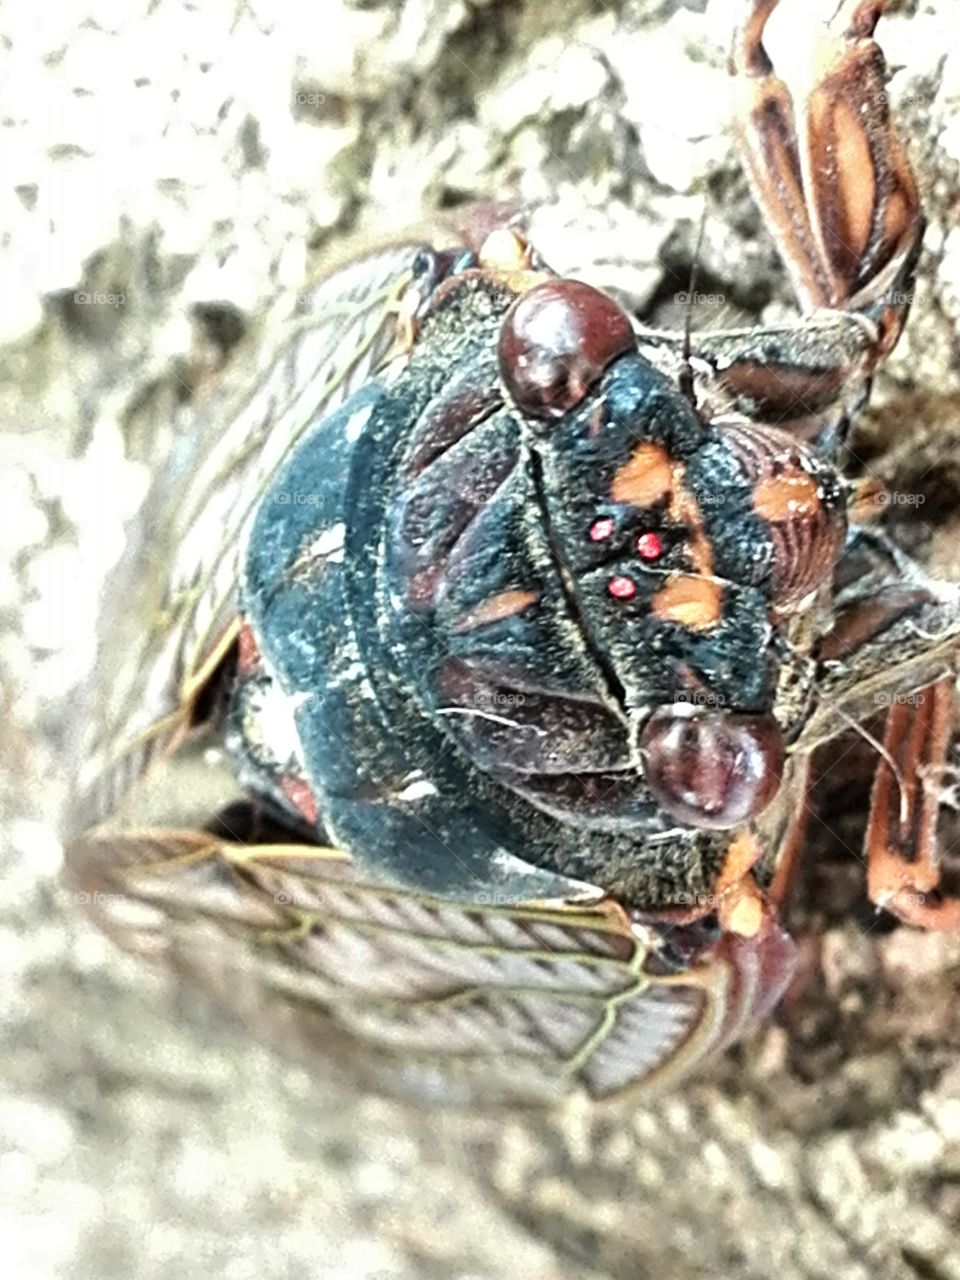 Cicada front view